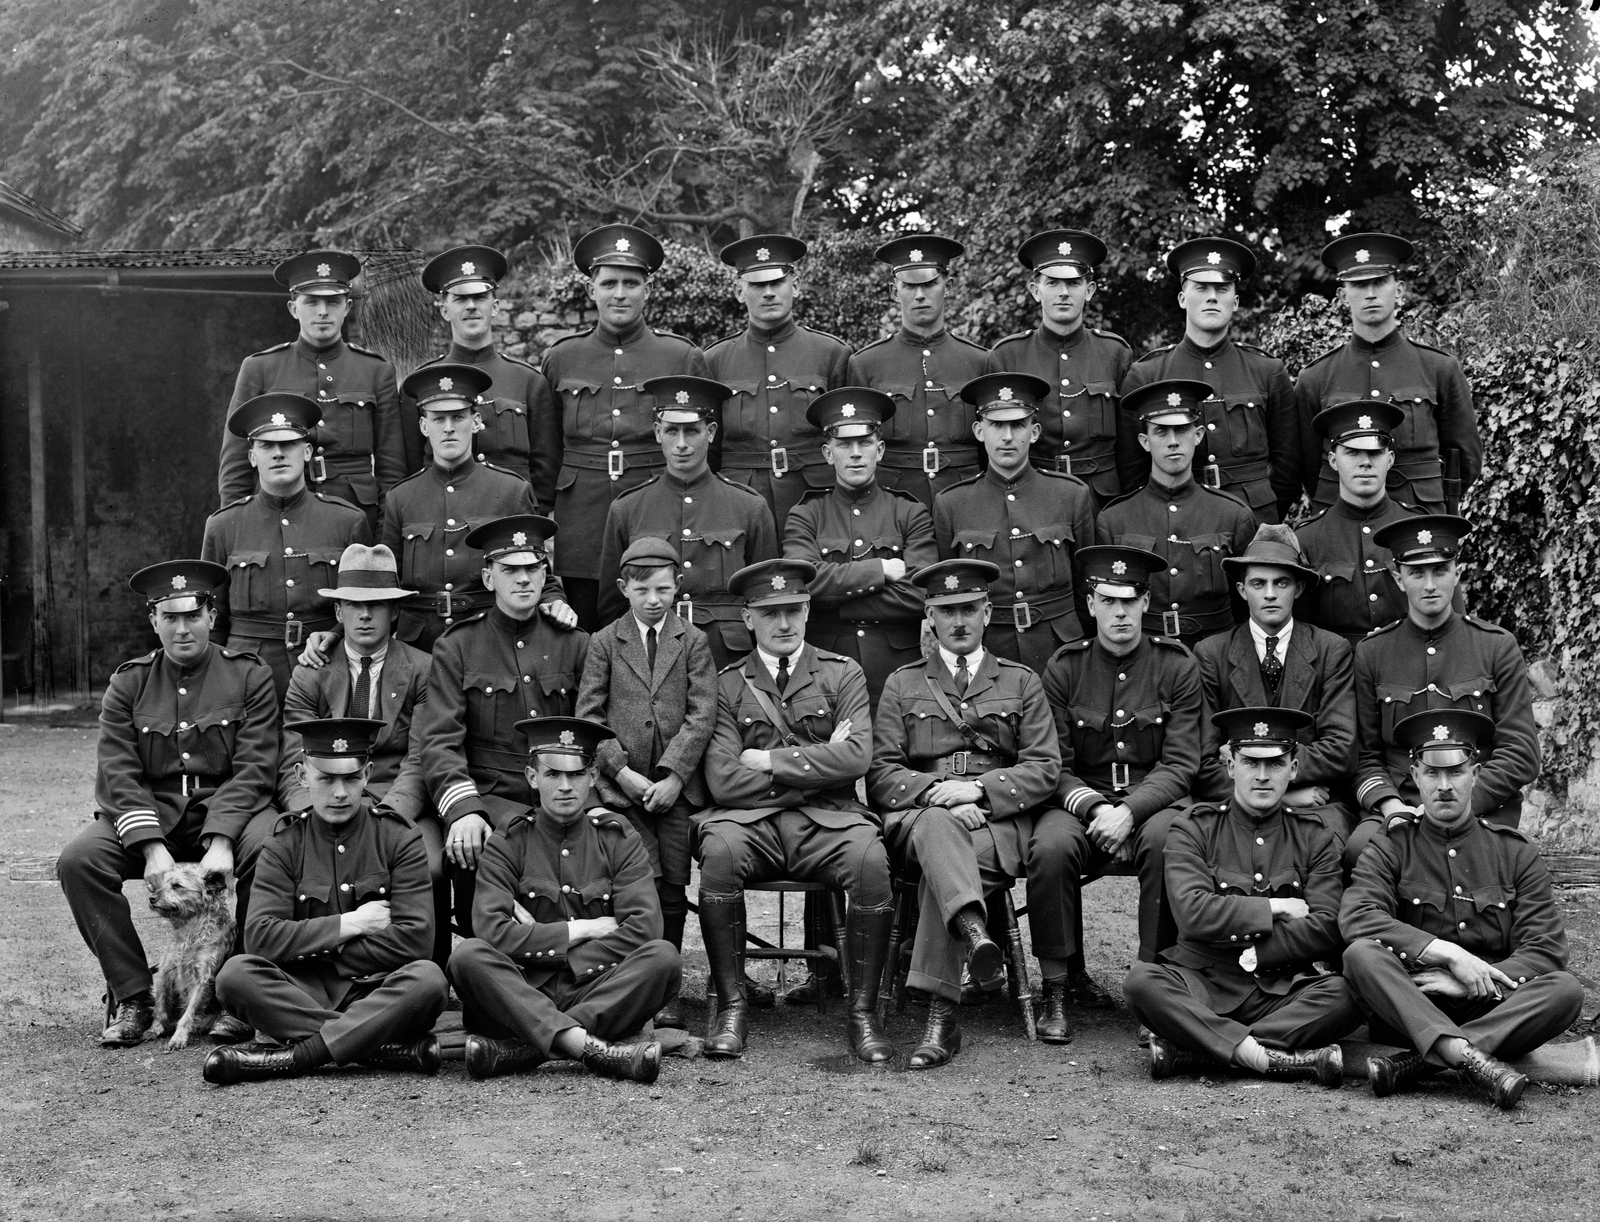 Image - By late 1922, the new guards were fanning out across the country. The guards above are from Wexford and Kilkenny. Image: National Library of Ireland